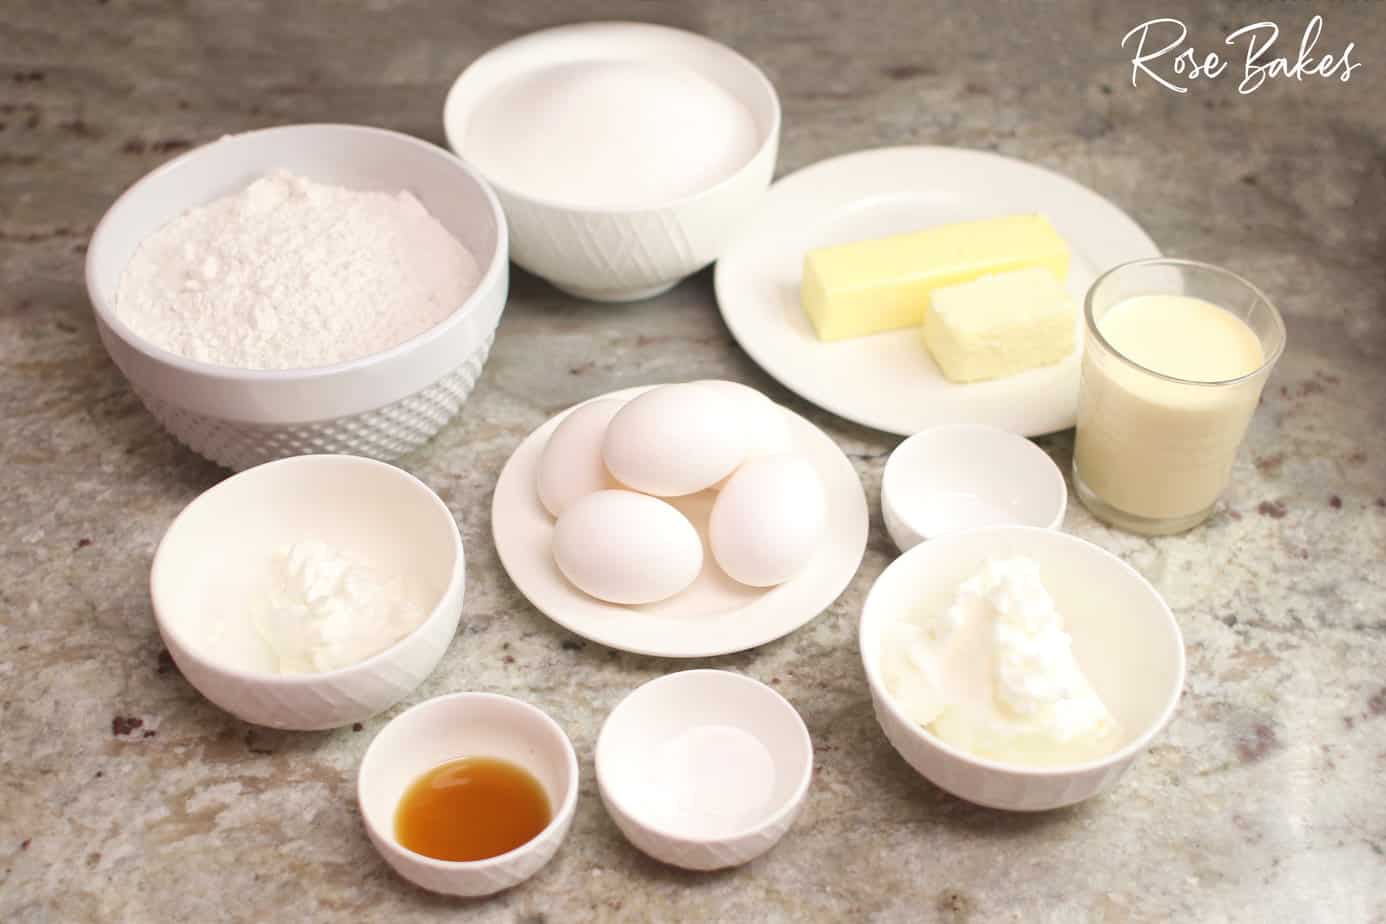 Ingredients portioned out in white dishes to make vanilla petit fours